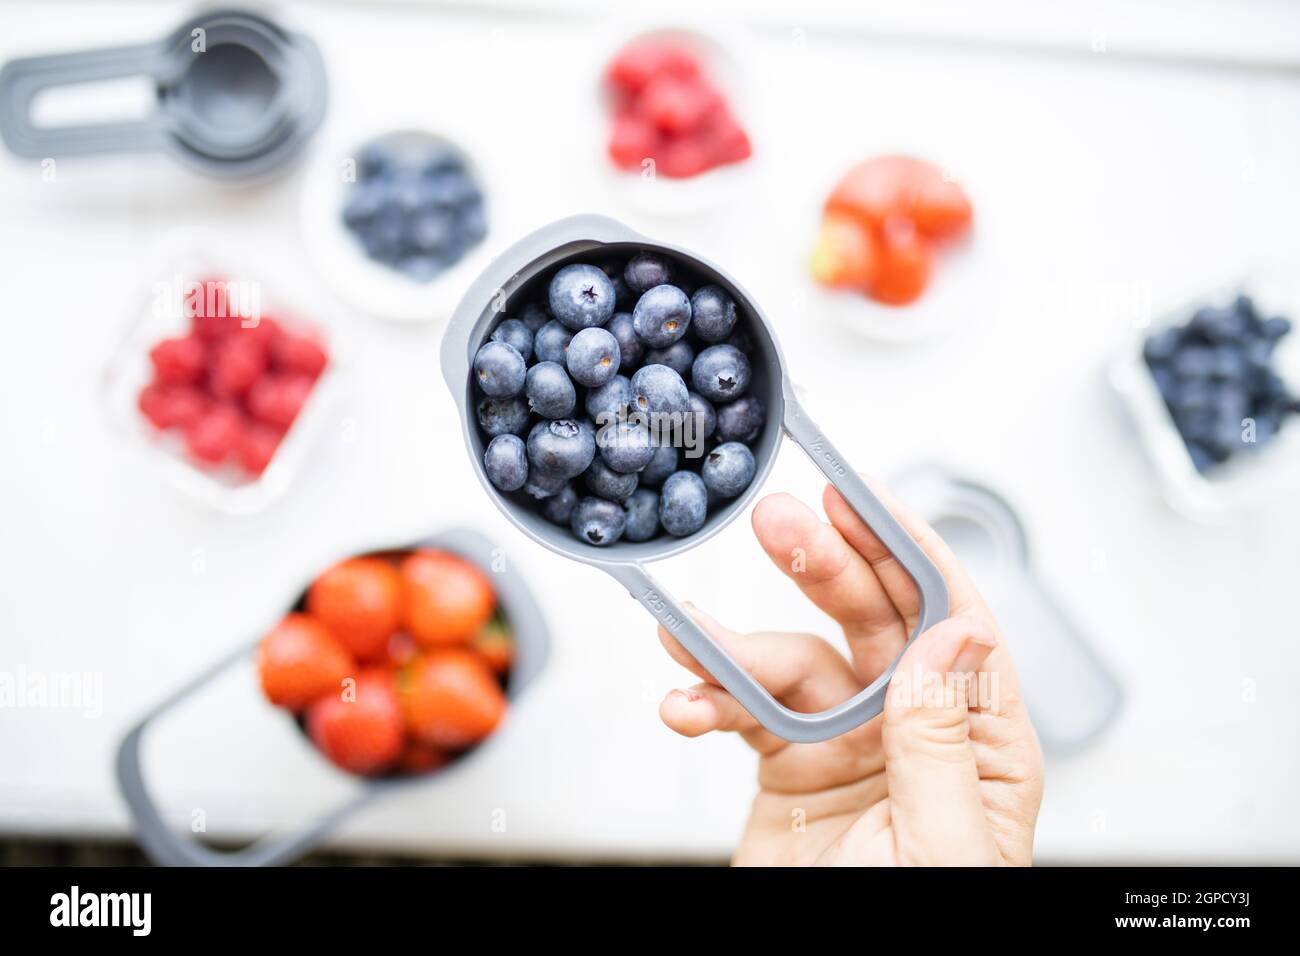 Female hand holding measuring cup of blueberries above more berries in containers. Blueberries, raspberries, and strawberries on table from above. Fru Stock Photo